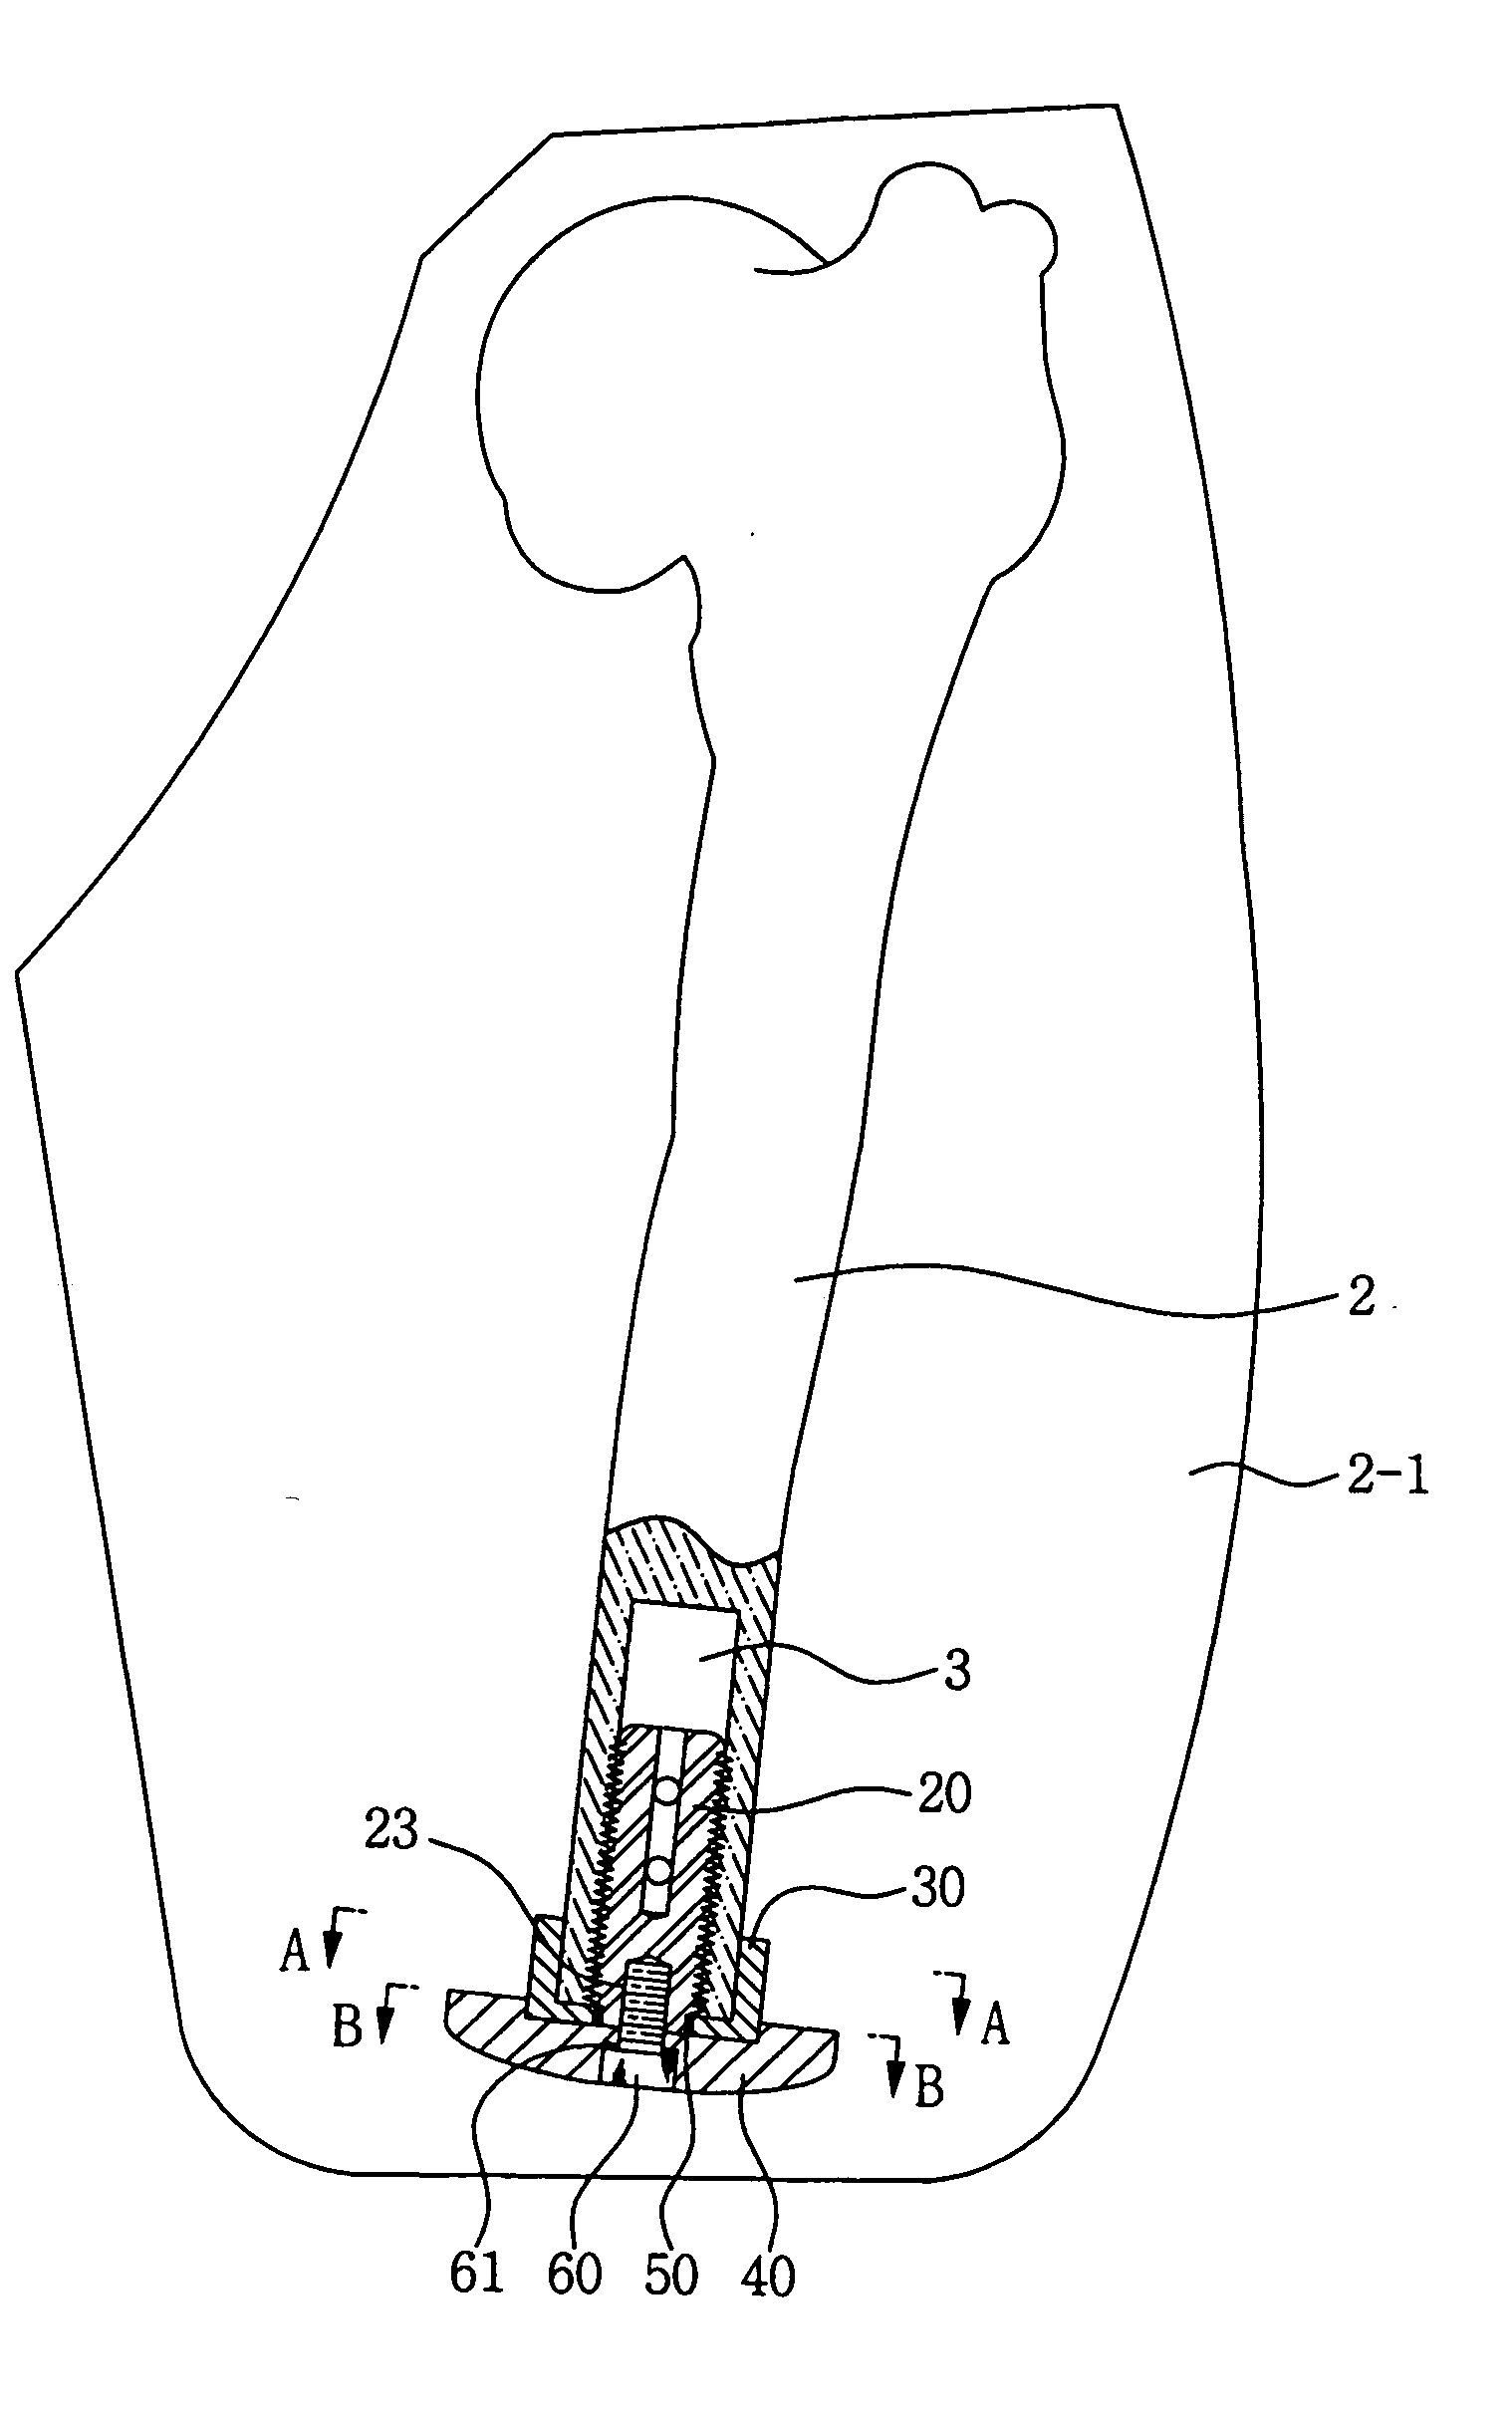 Implant device for osseointegration to endure weight